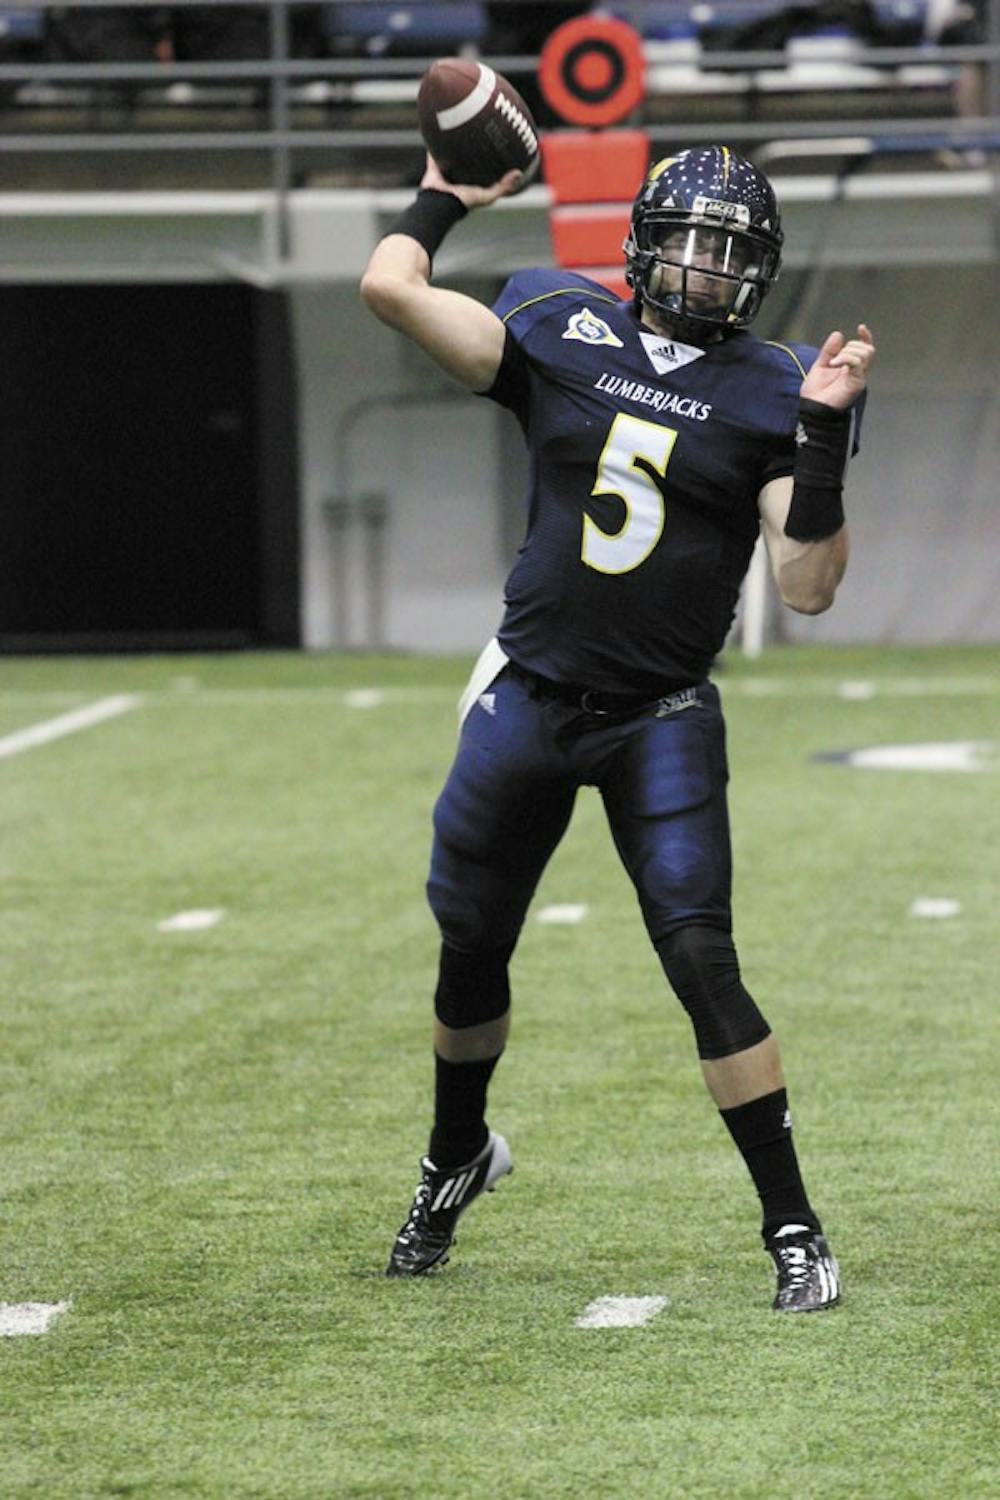 Junior quarterback Cary Grossart throws a pass during the game against Eastern Washington.